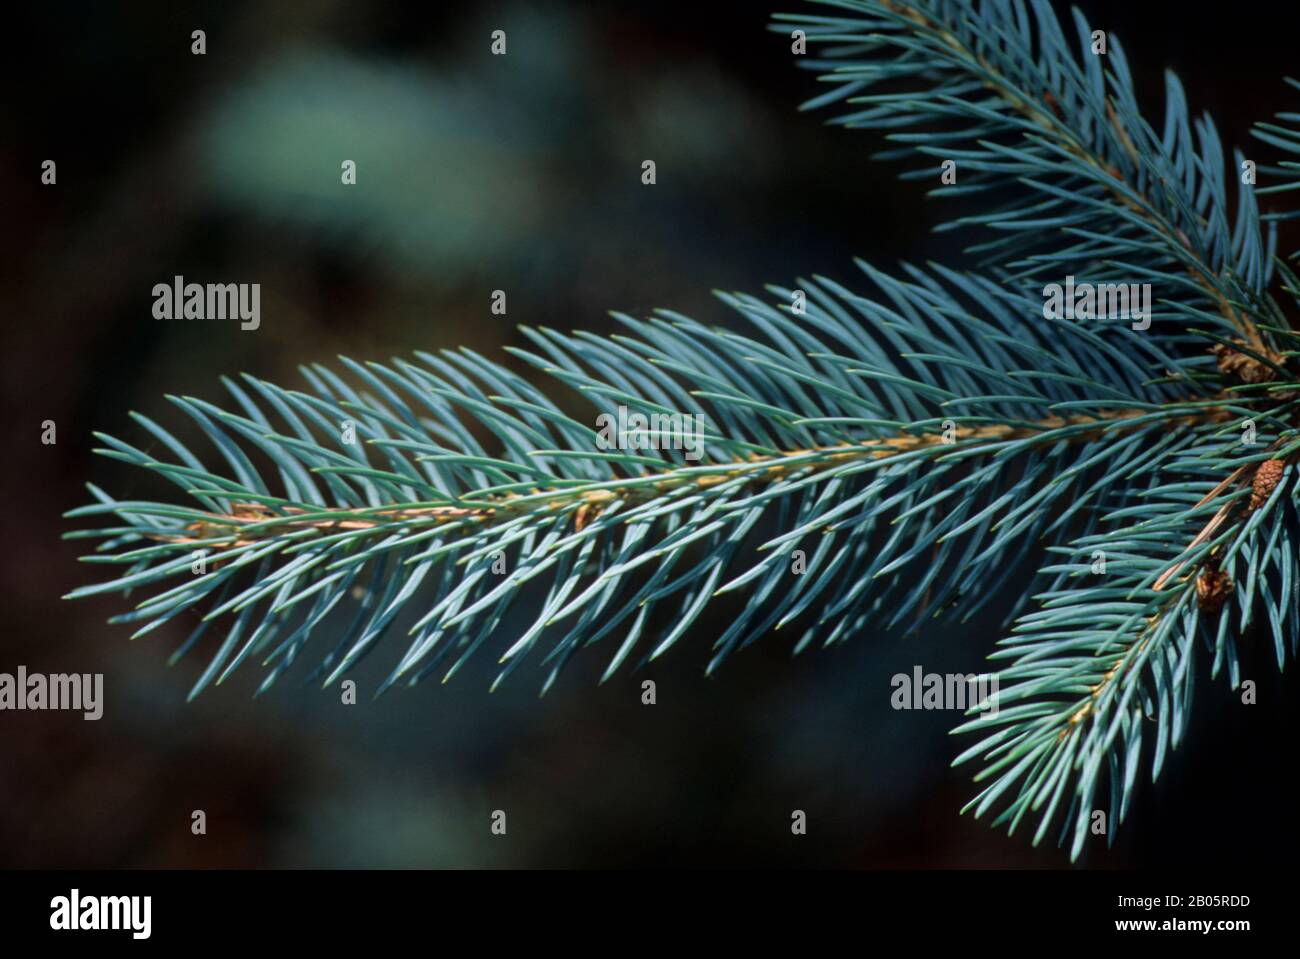 USA, WASHINGTON, BLUE SPRUCE (Picea pungens) CLOSE-UP OF BRANCH Stock Photo